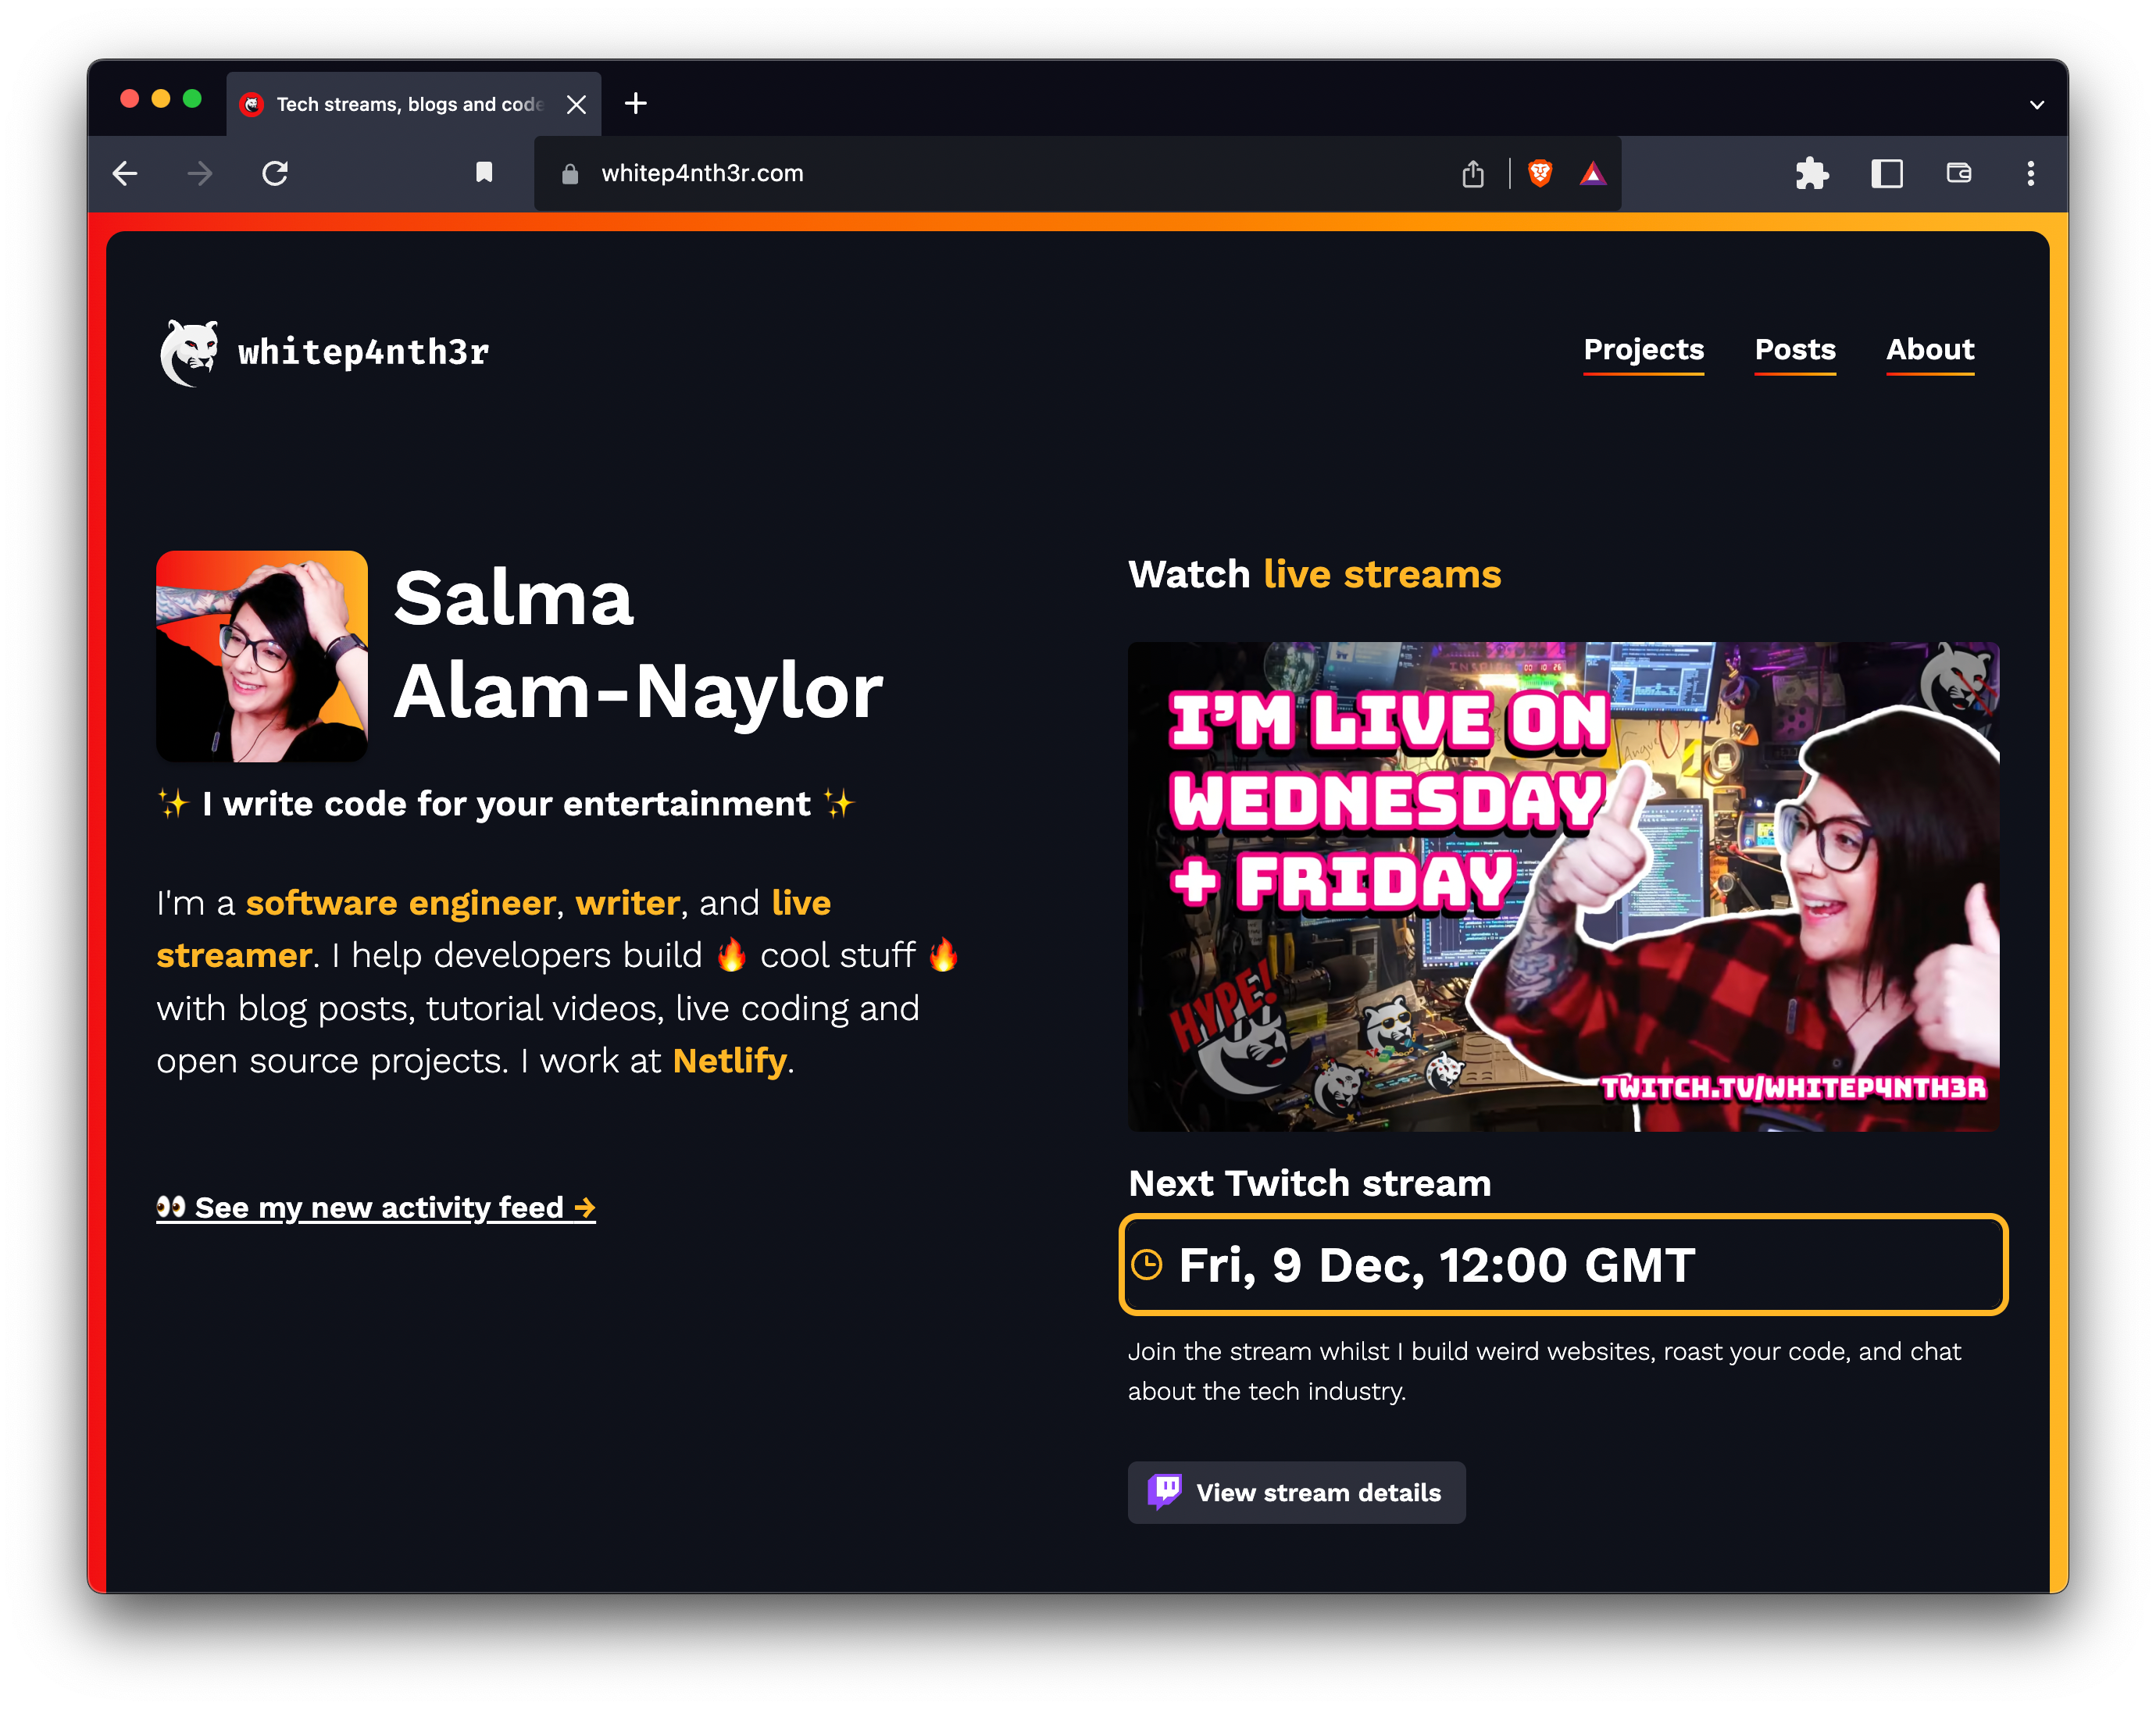 My website screenshot, showing my home page with a next Twitch stream section, showing the time in GMT